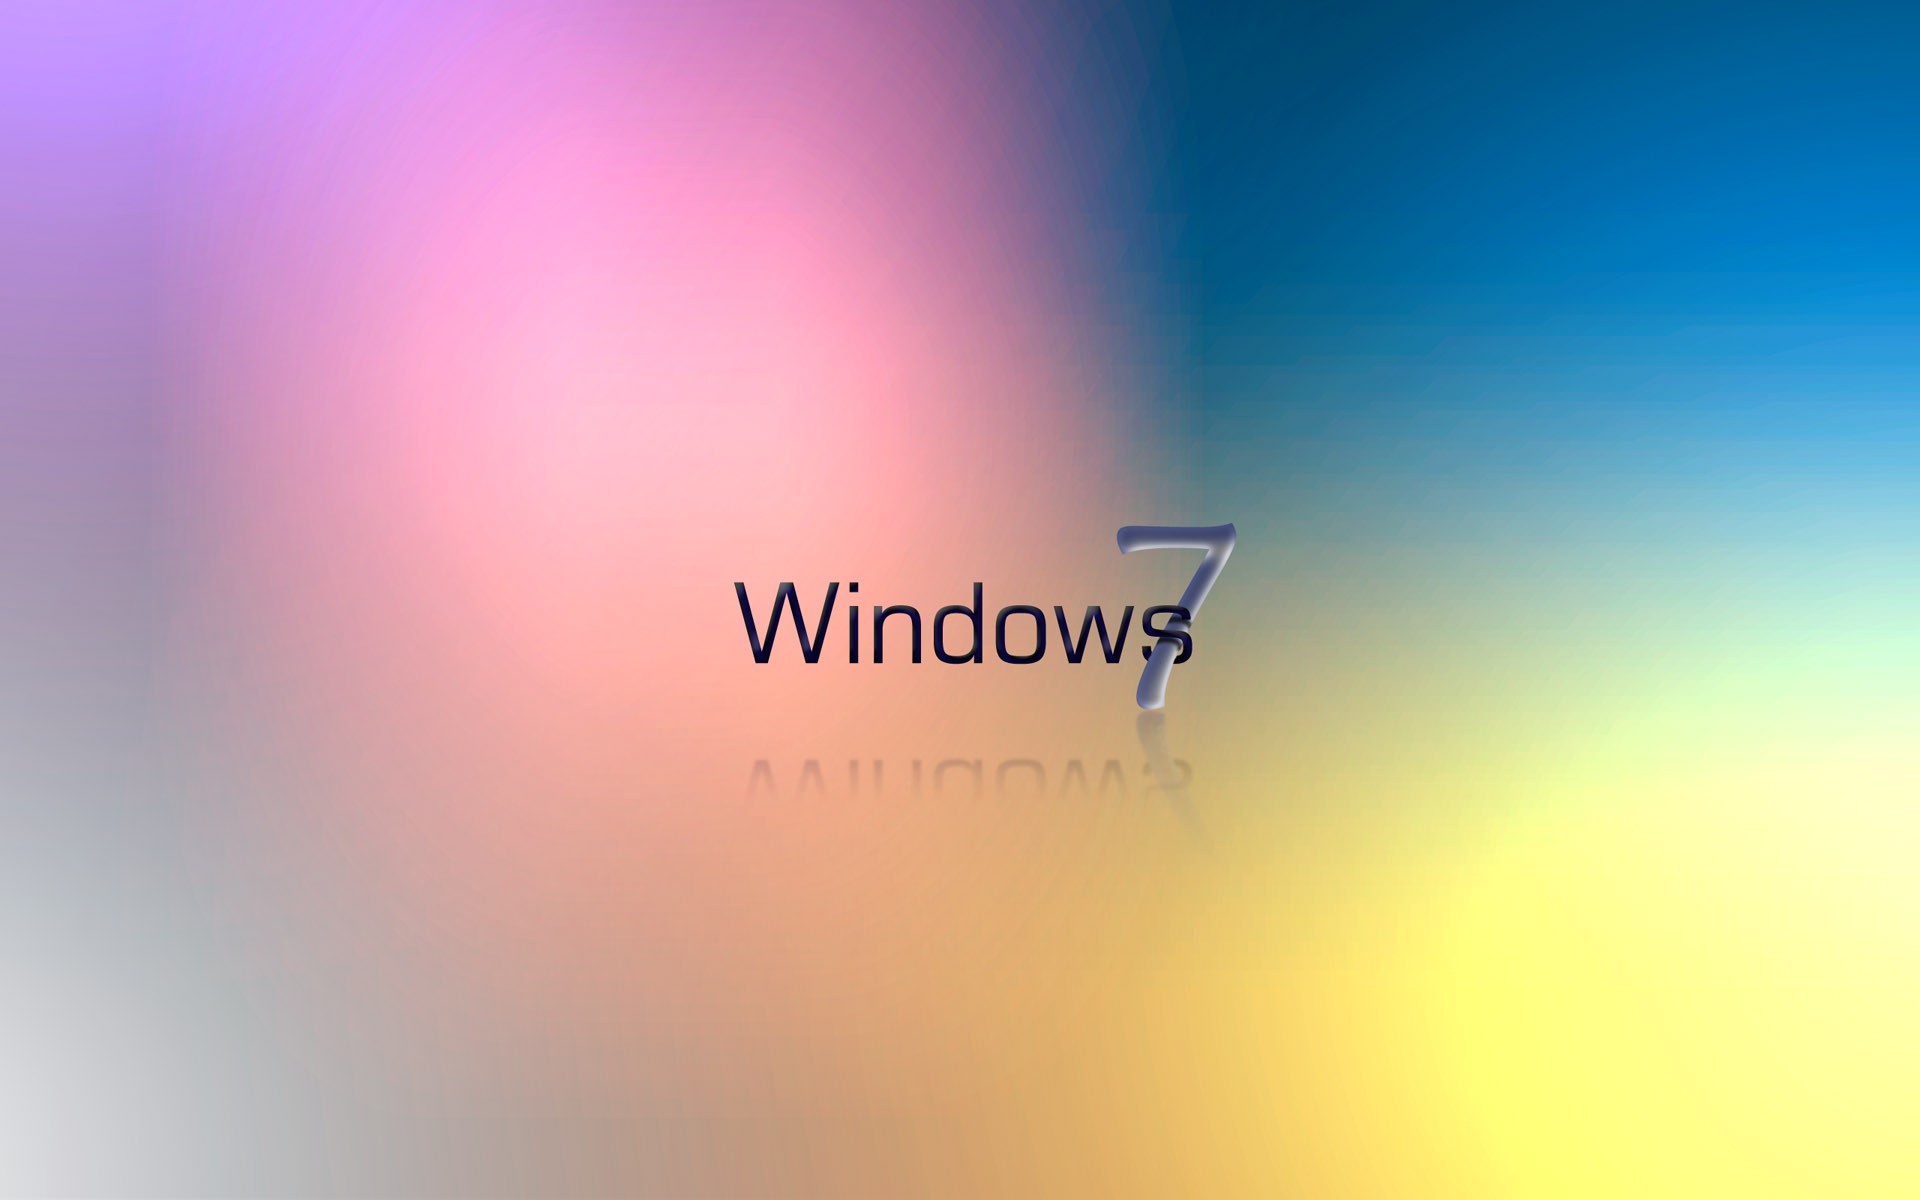 Windows Awesome Wallpaper